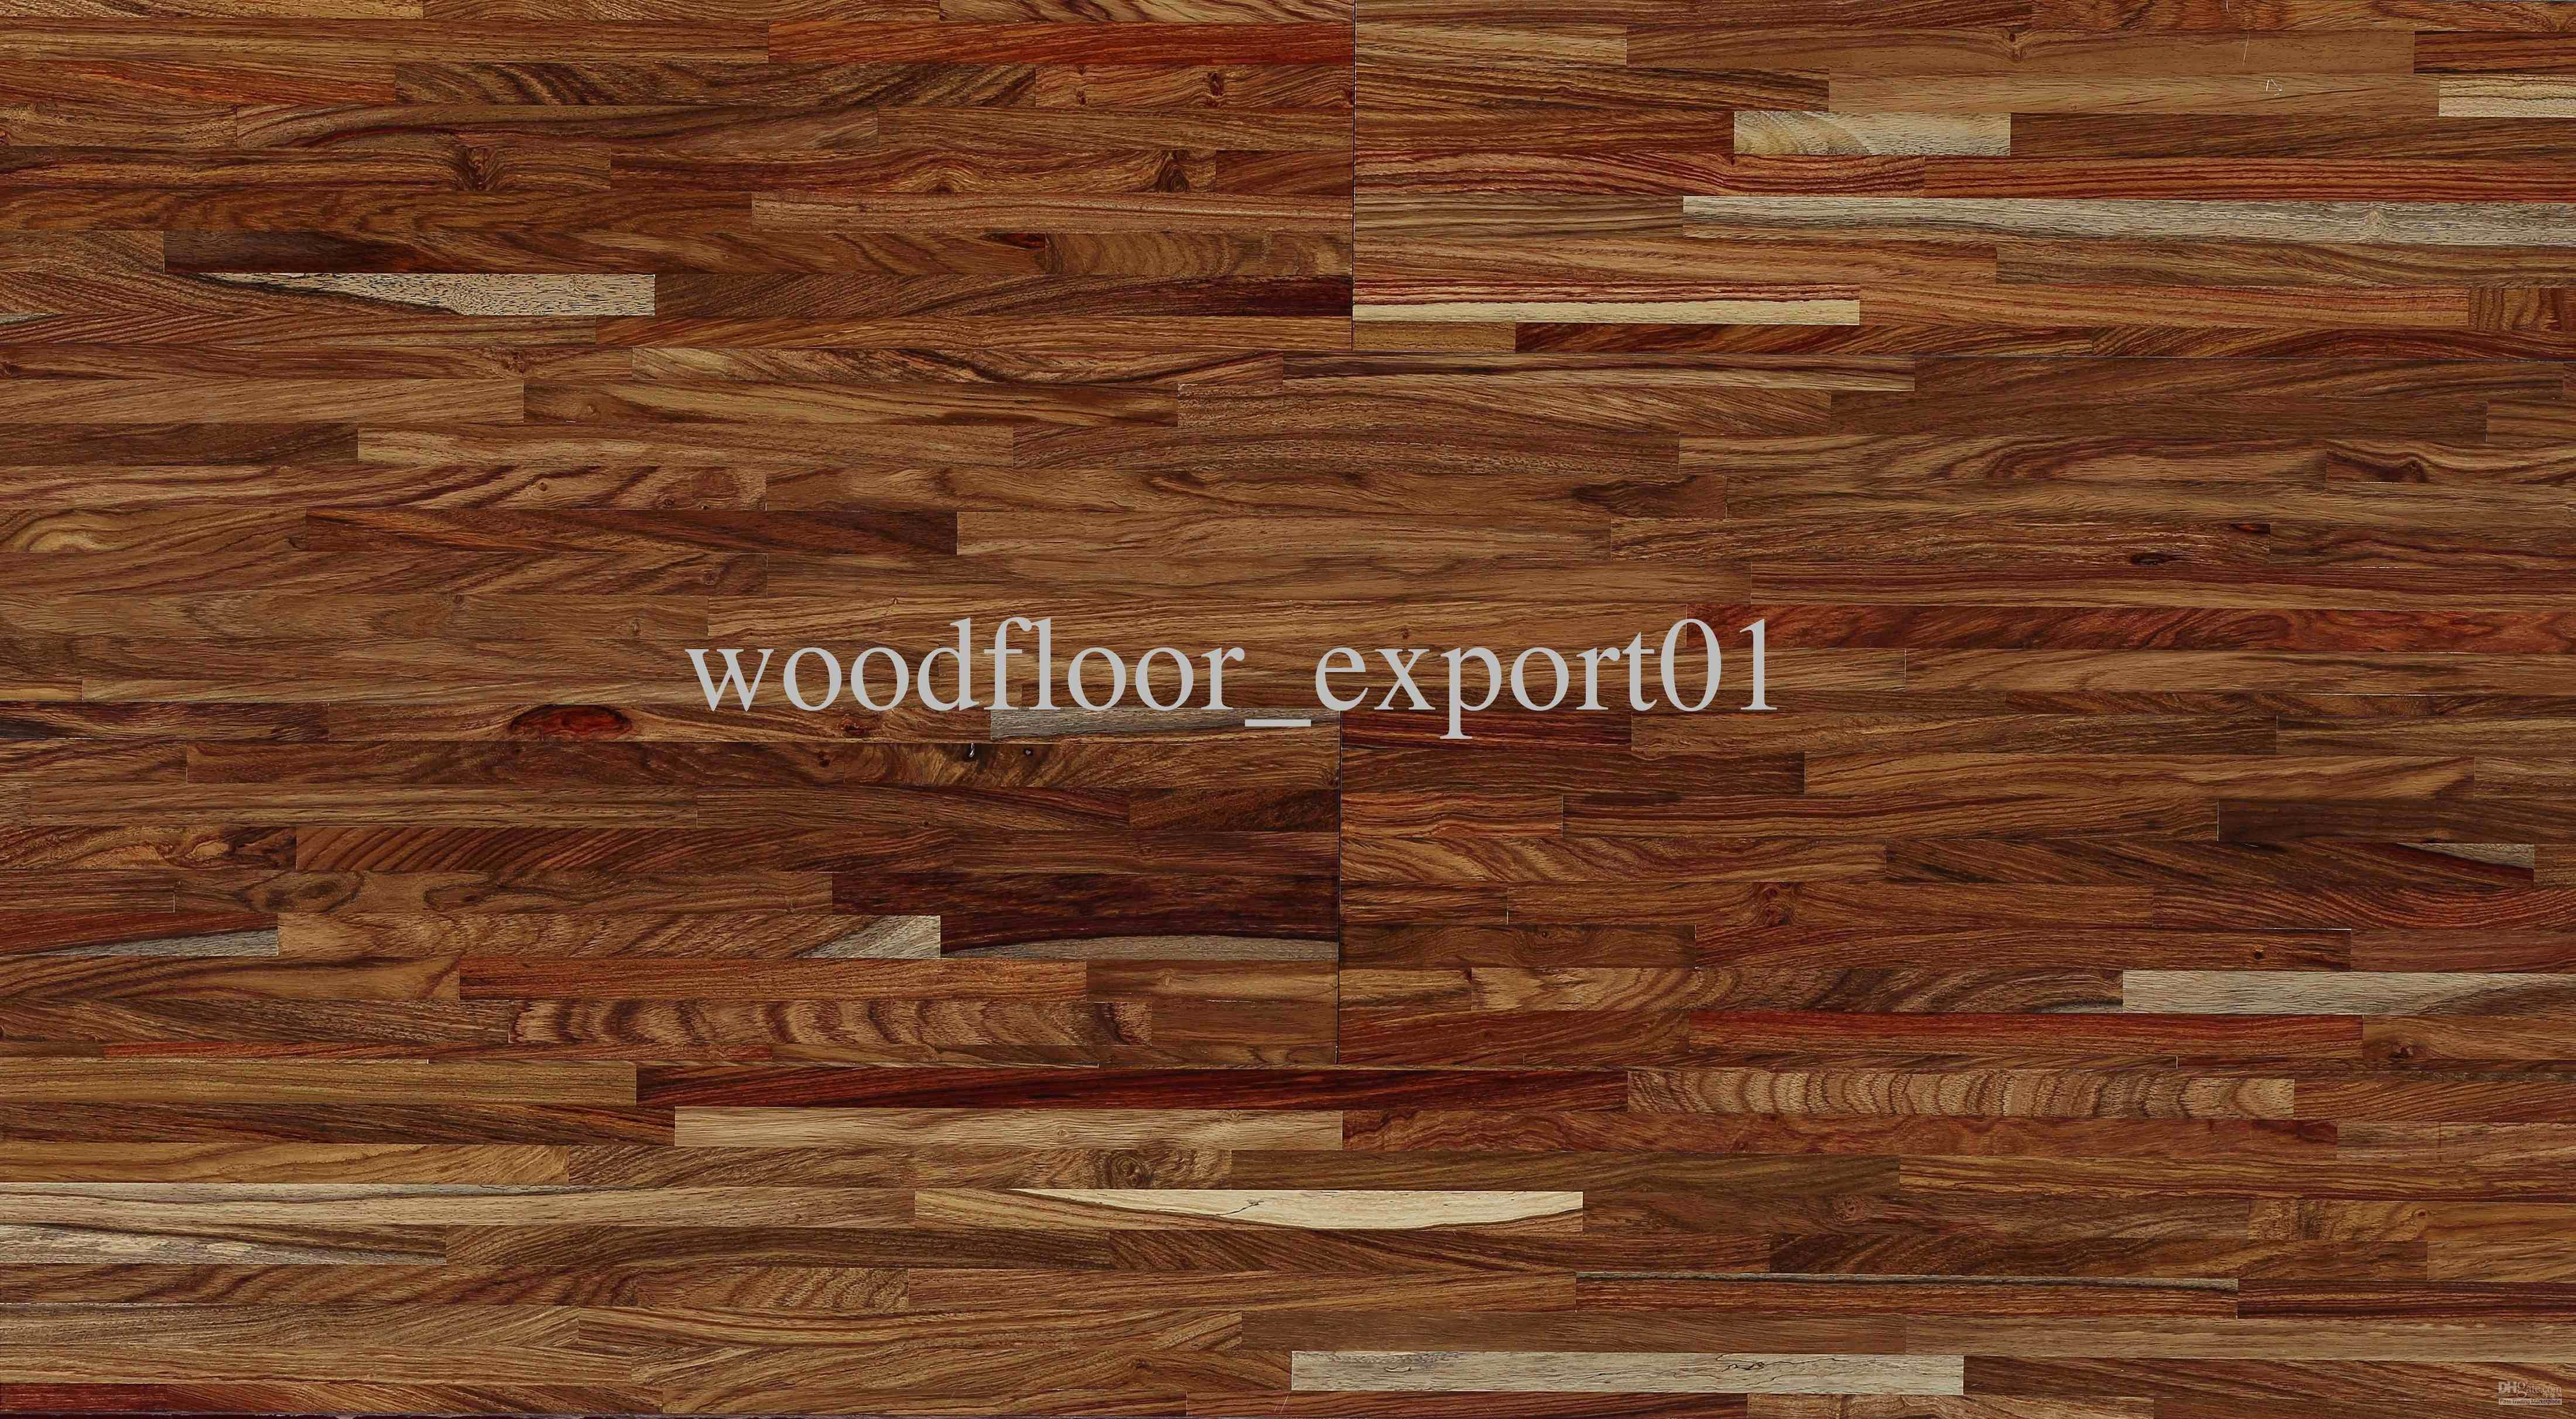 13 Stylish Hardwood Floor Refinishing Charlotte Nc 2022 free download hardwood floor refinishing charlotte nc of 19 awesome how to restore hardwood floors pictures dizpos com pertaining to how to restore hardwood floors new 50 inspirational sanding and refinis